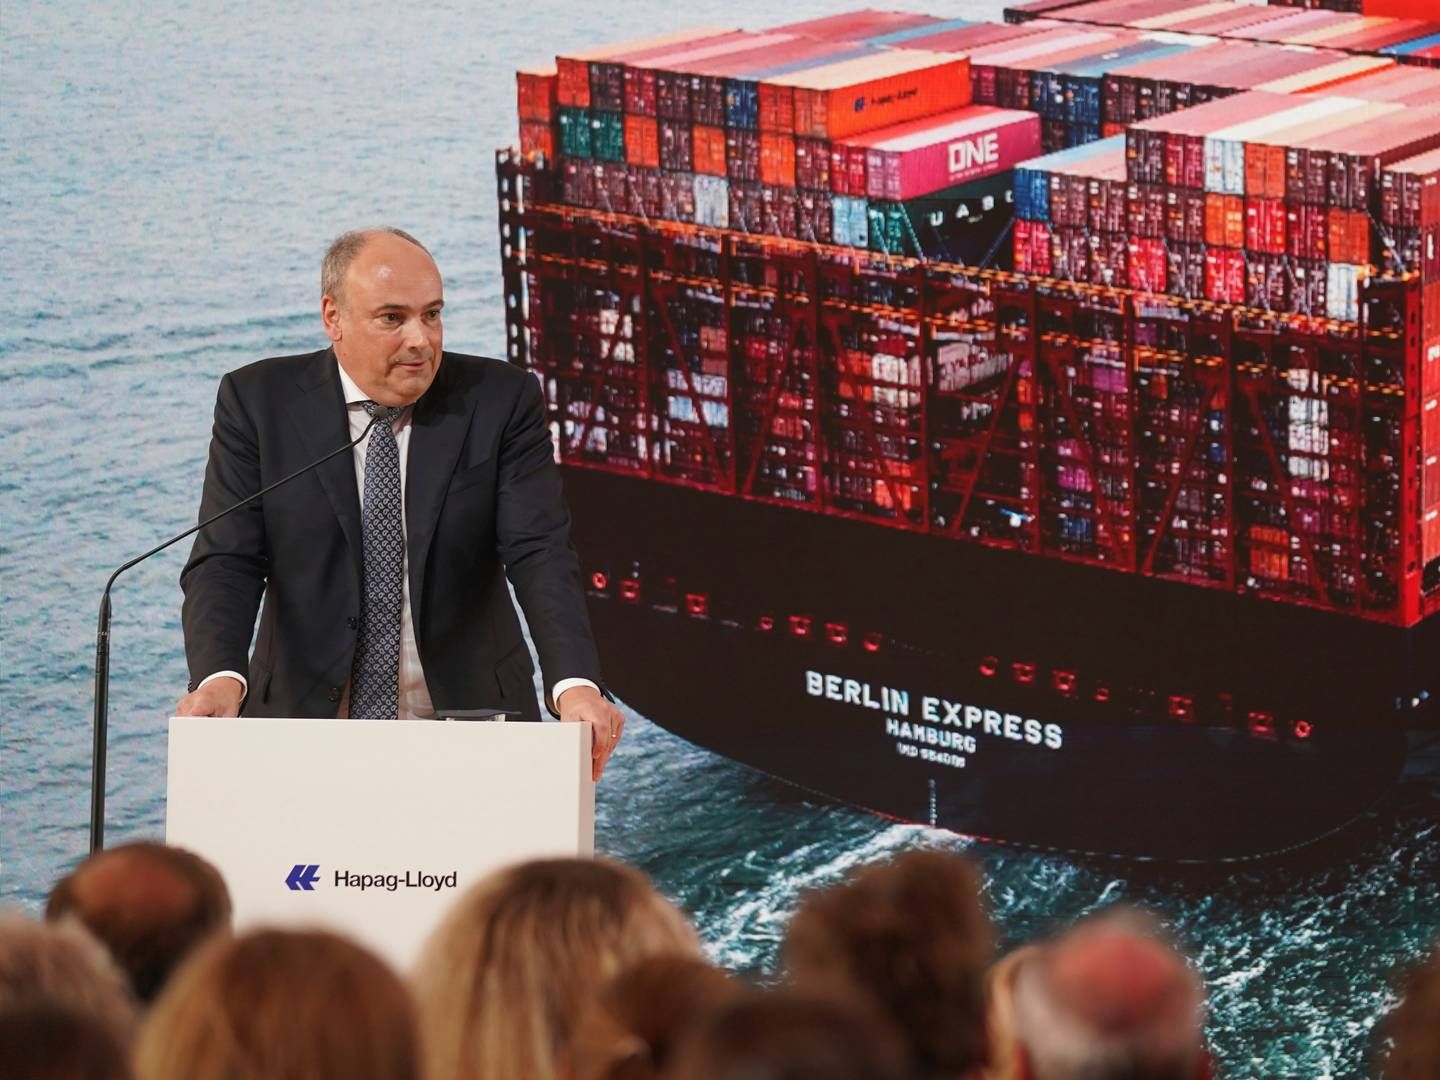 "We might have a slightly earlier peak season because of the longer transit times that we're seeing at the moment and with all the uncertainty, people might try to get cargo a bit earlier," says Hapag-Lloyd CEO Rolf Habben Jansen. | Foto: Marcus Brandt/AP/Ritzau Scanpix